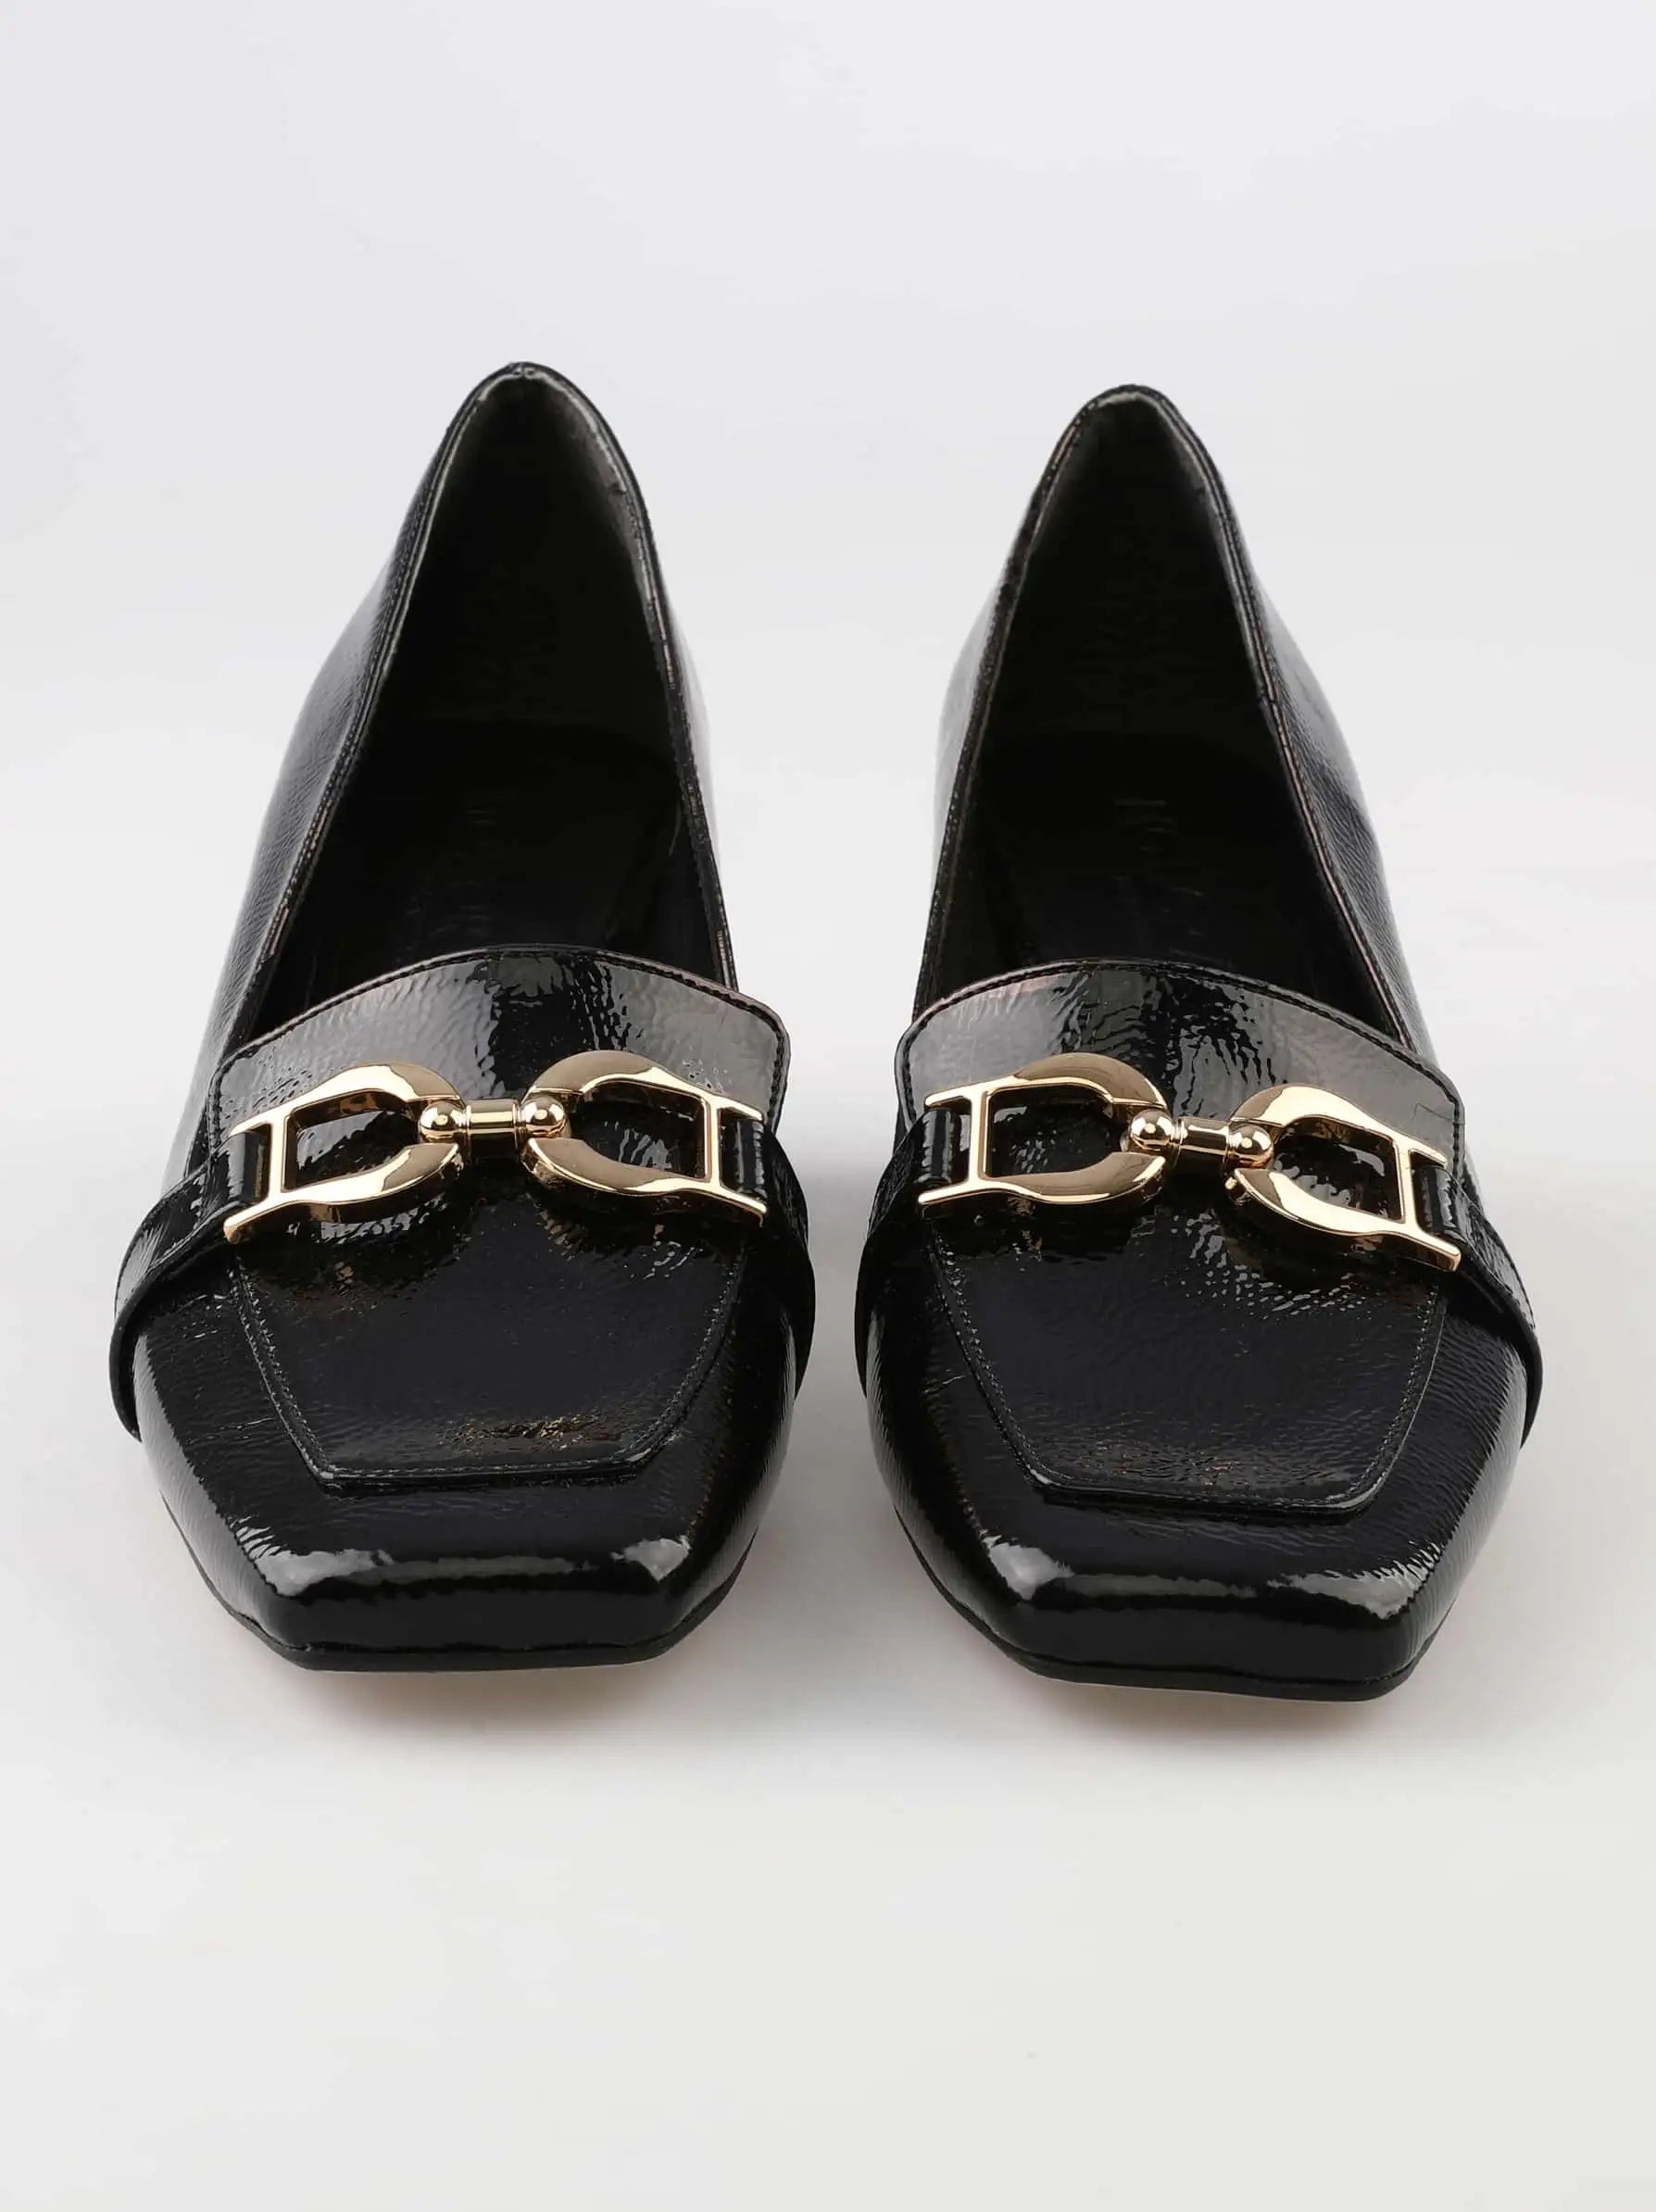 Vtg XAVIER DANAUD Shoes Us7 Gold Buckle Black Heels Sandals / Made in  Italy/ Never Worn - Etsy